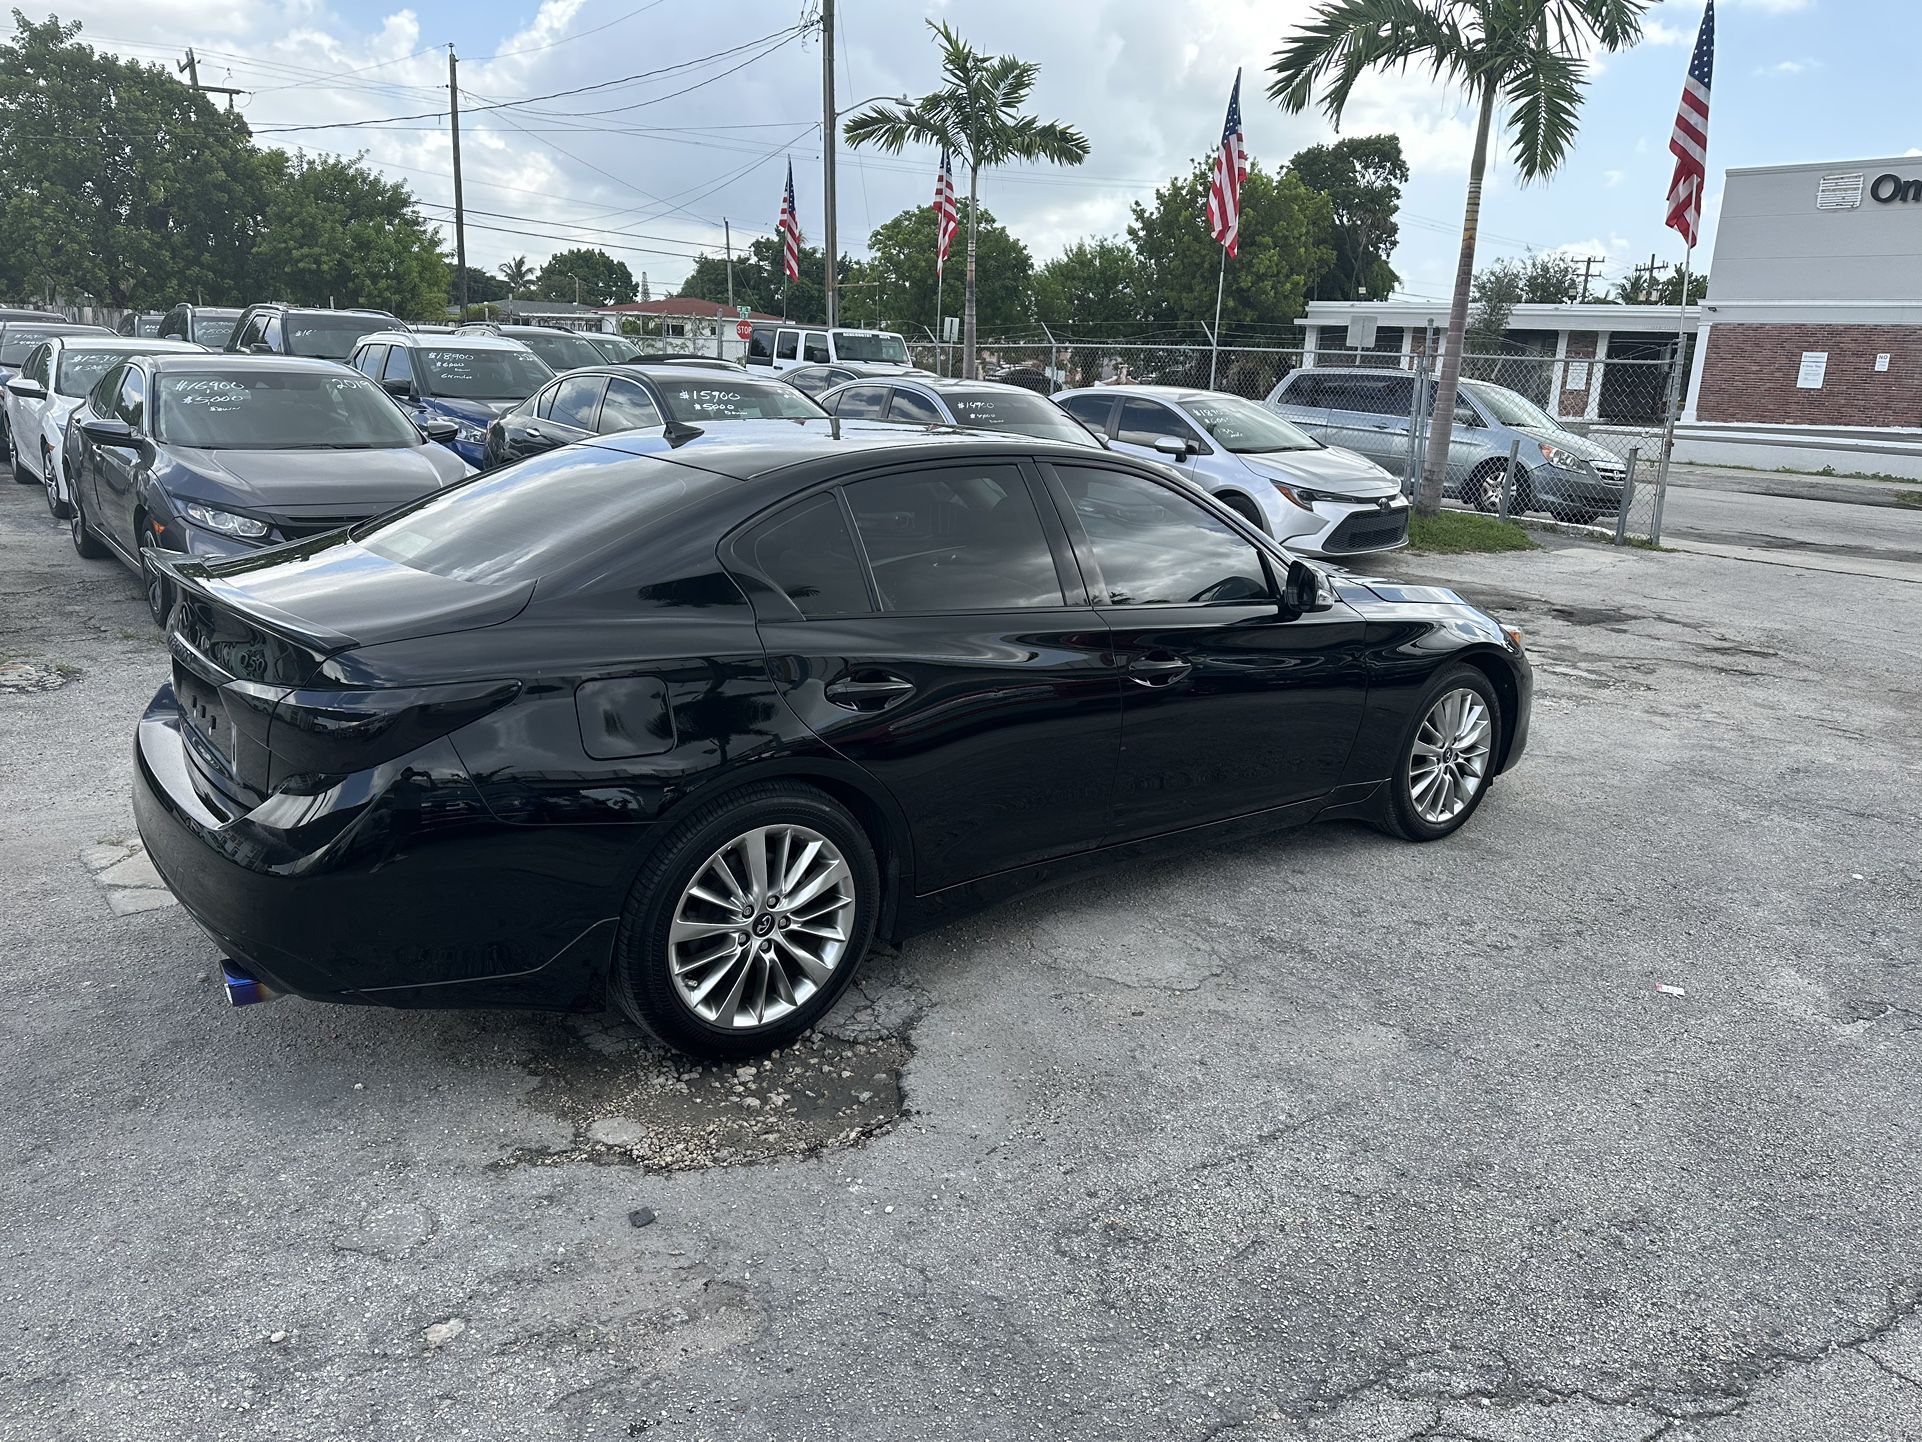 used 2019 infiniti q50 - front view 2